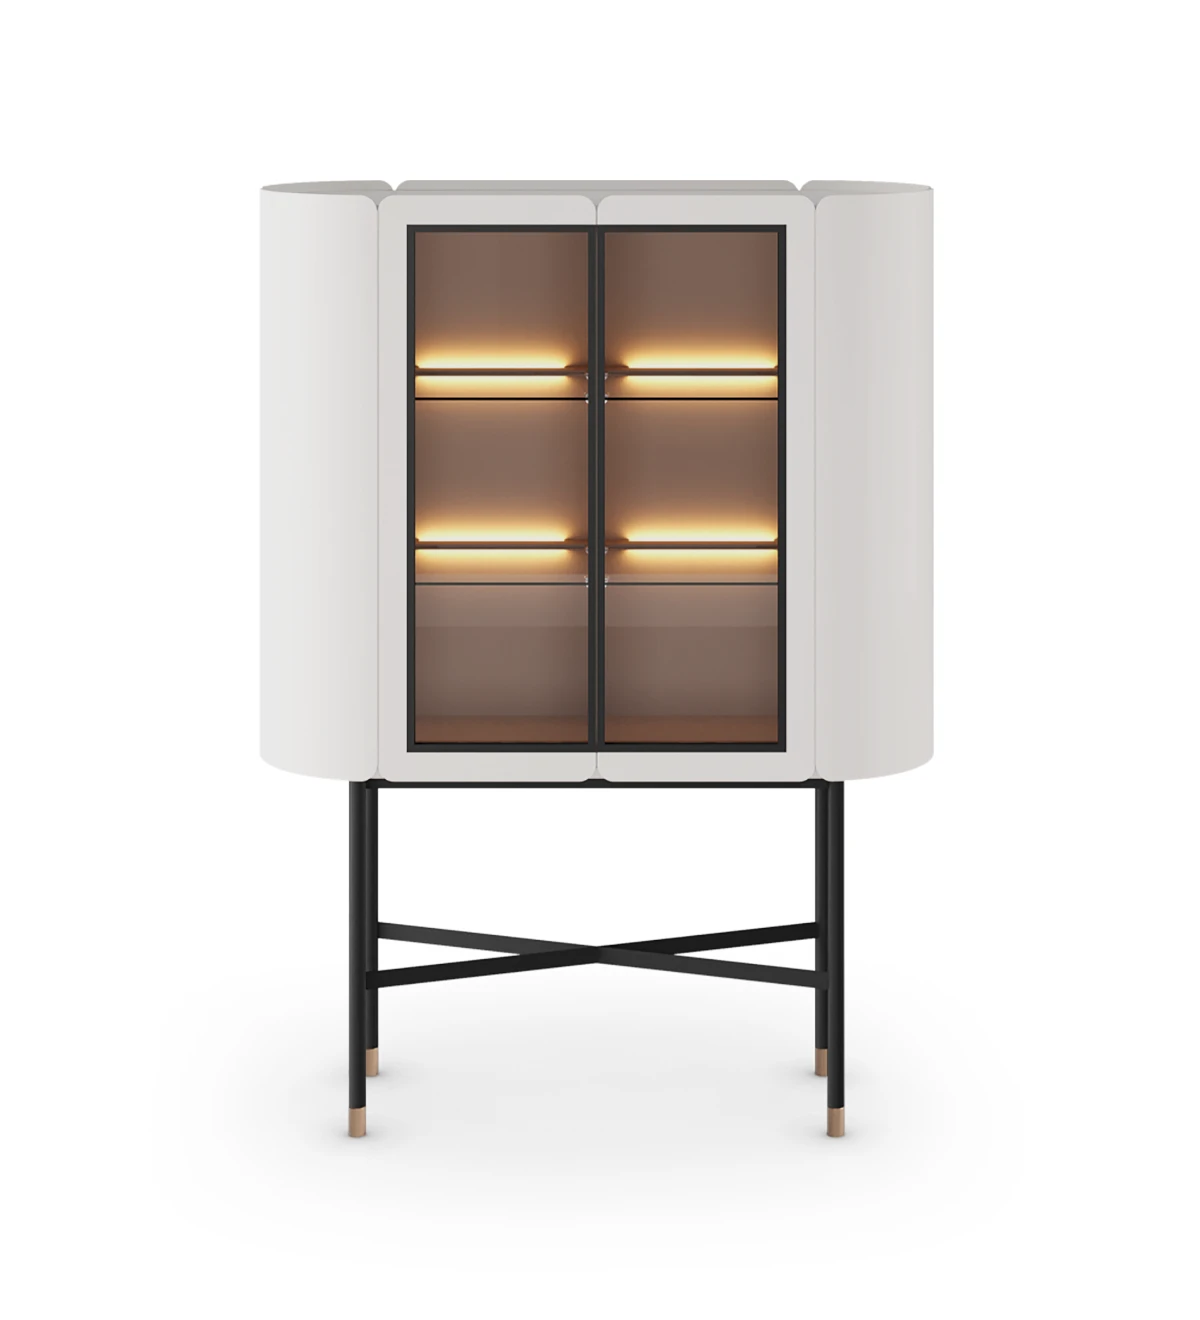 Showcase with 2 doors in pearl lacquered and glass, interior glass shelves, black lacquered feet with gold detail.